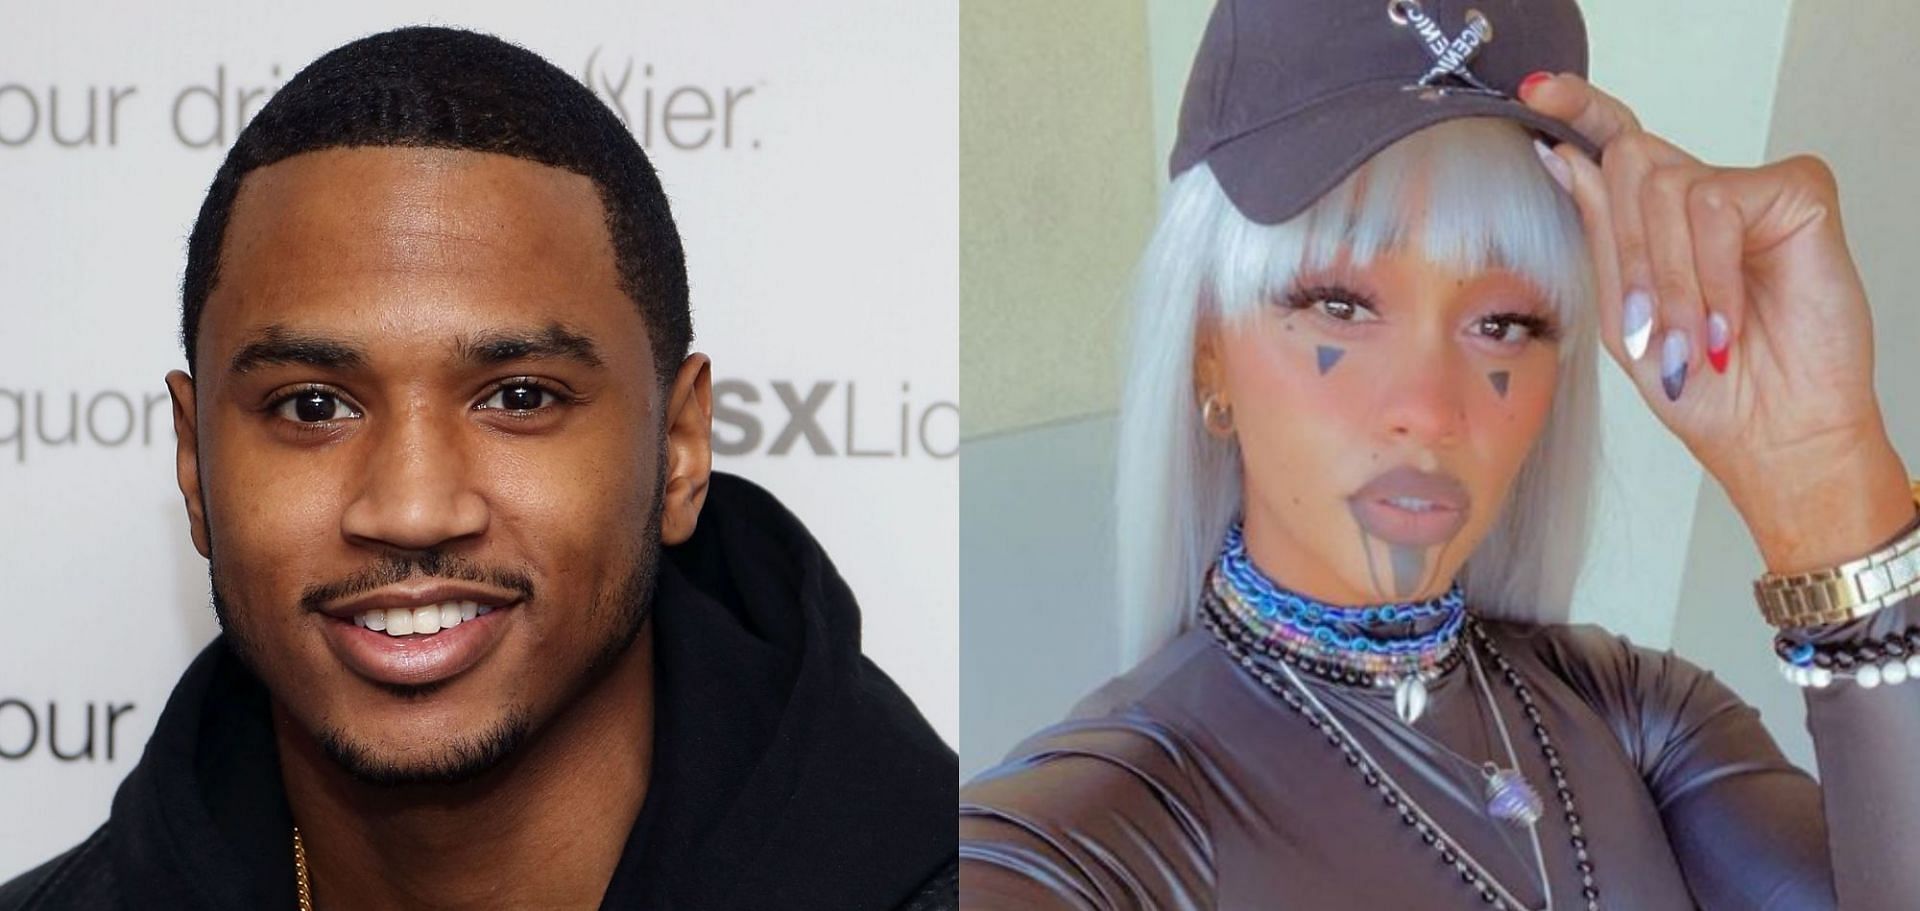 Dylan Gonzalez has accused Trey Songz of assault and misconduct (Image via Taylor Hill/Getty Images and Dylan Gonzalez/Instagram)